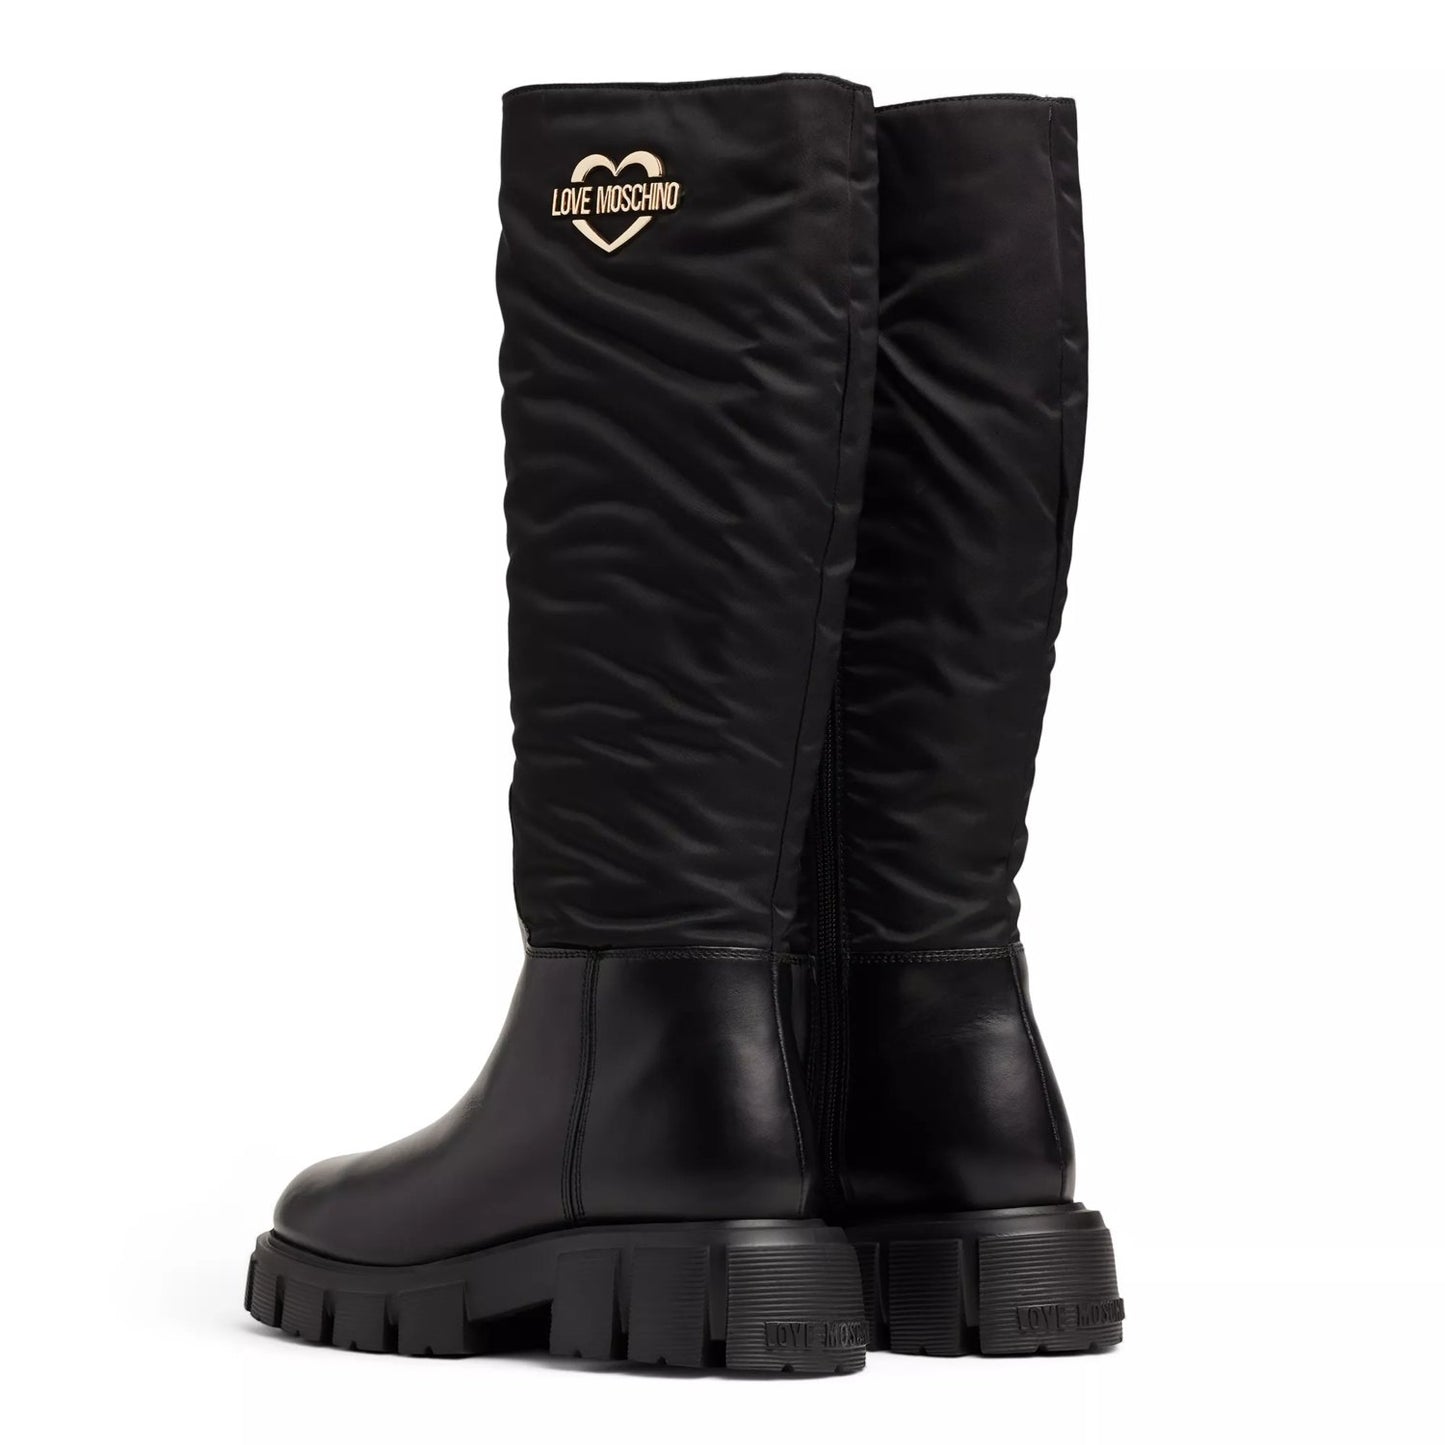 Stivaled Knee-High Riding Boots